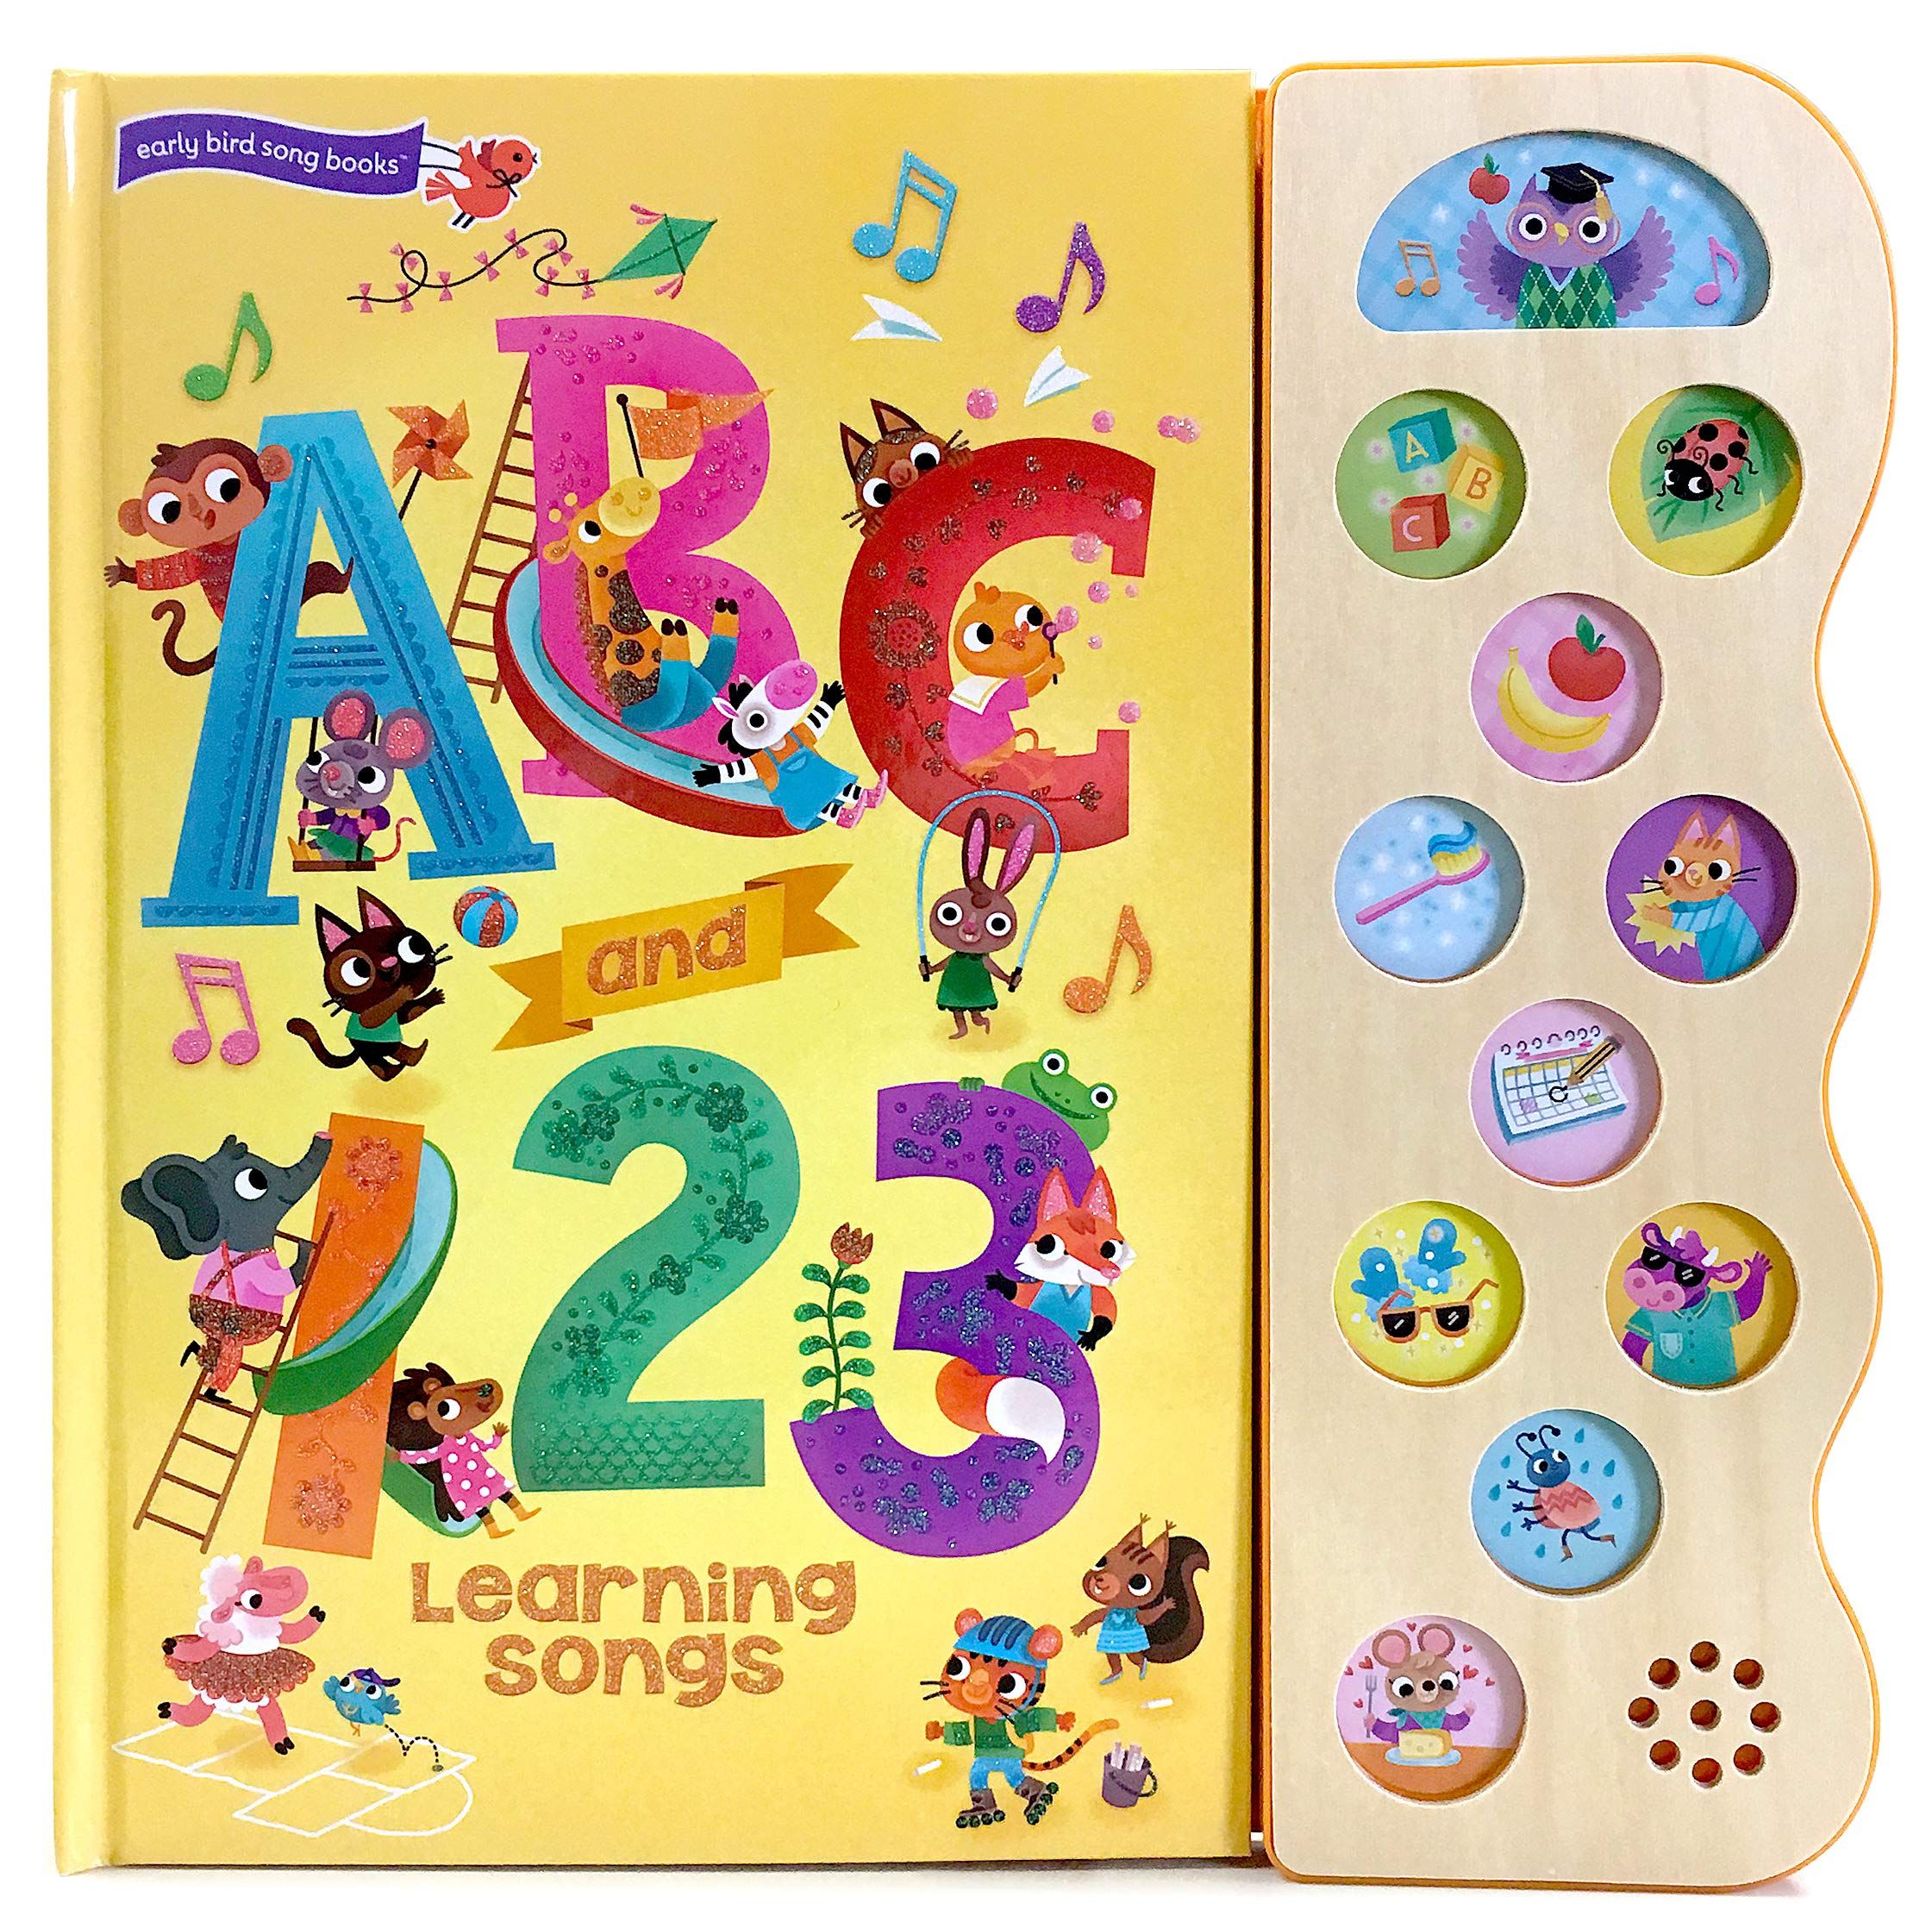 ABC book cover and 123 learning songs